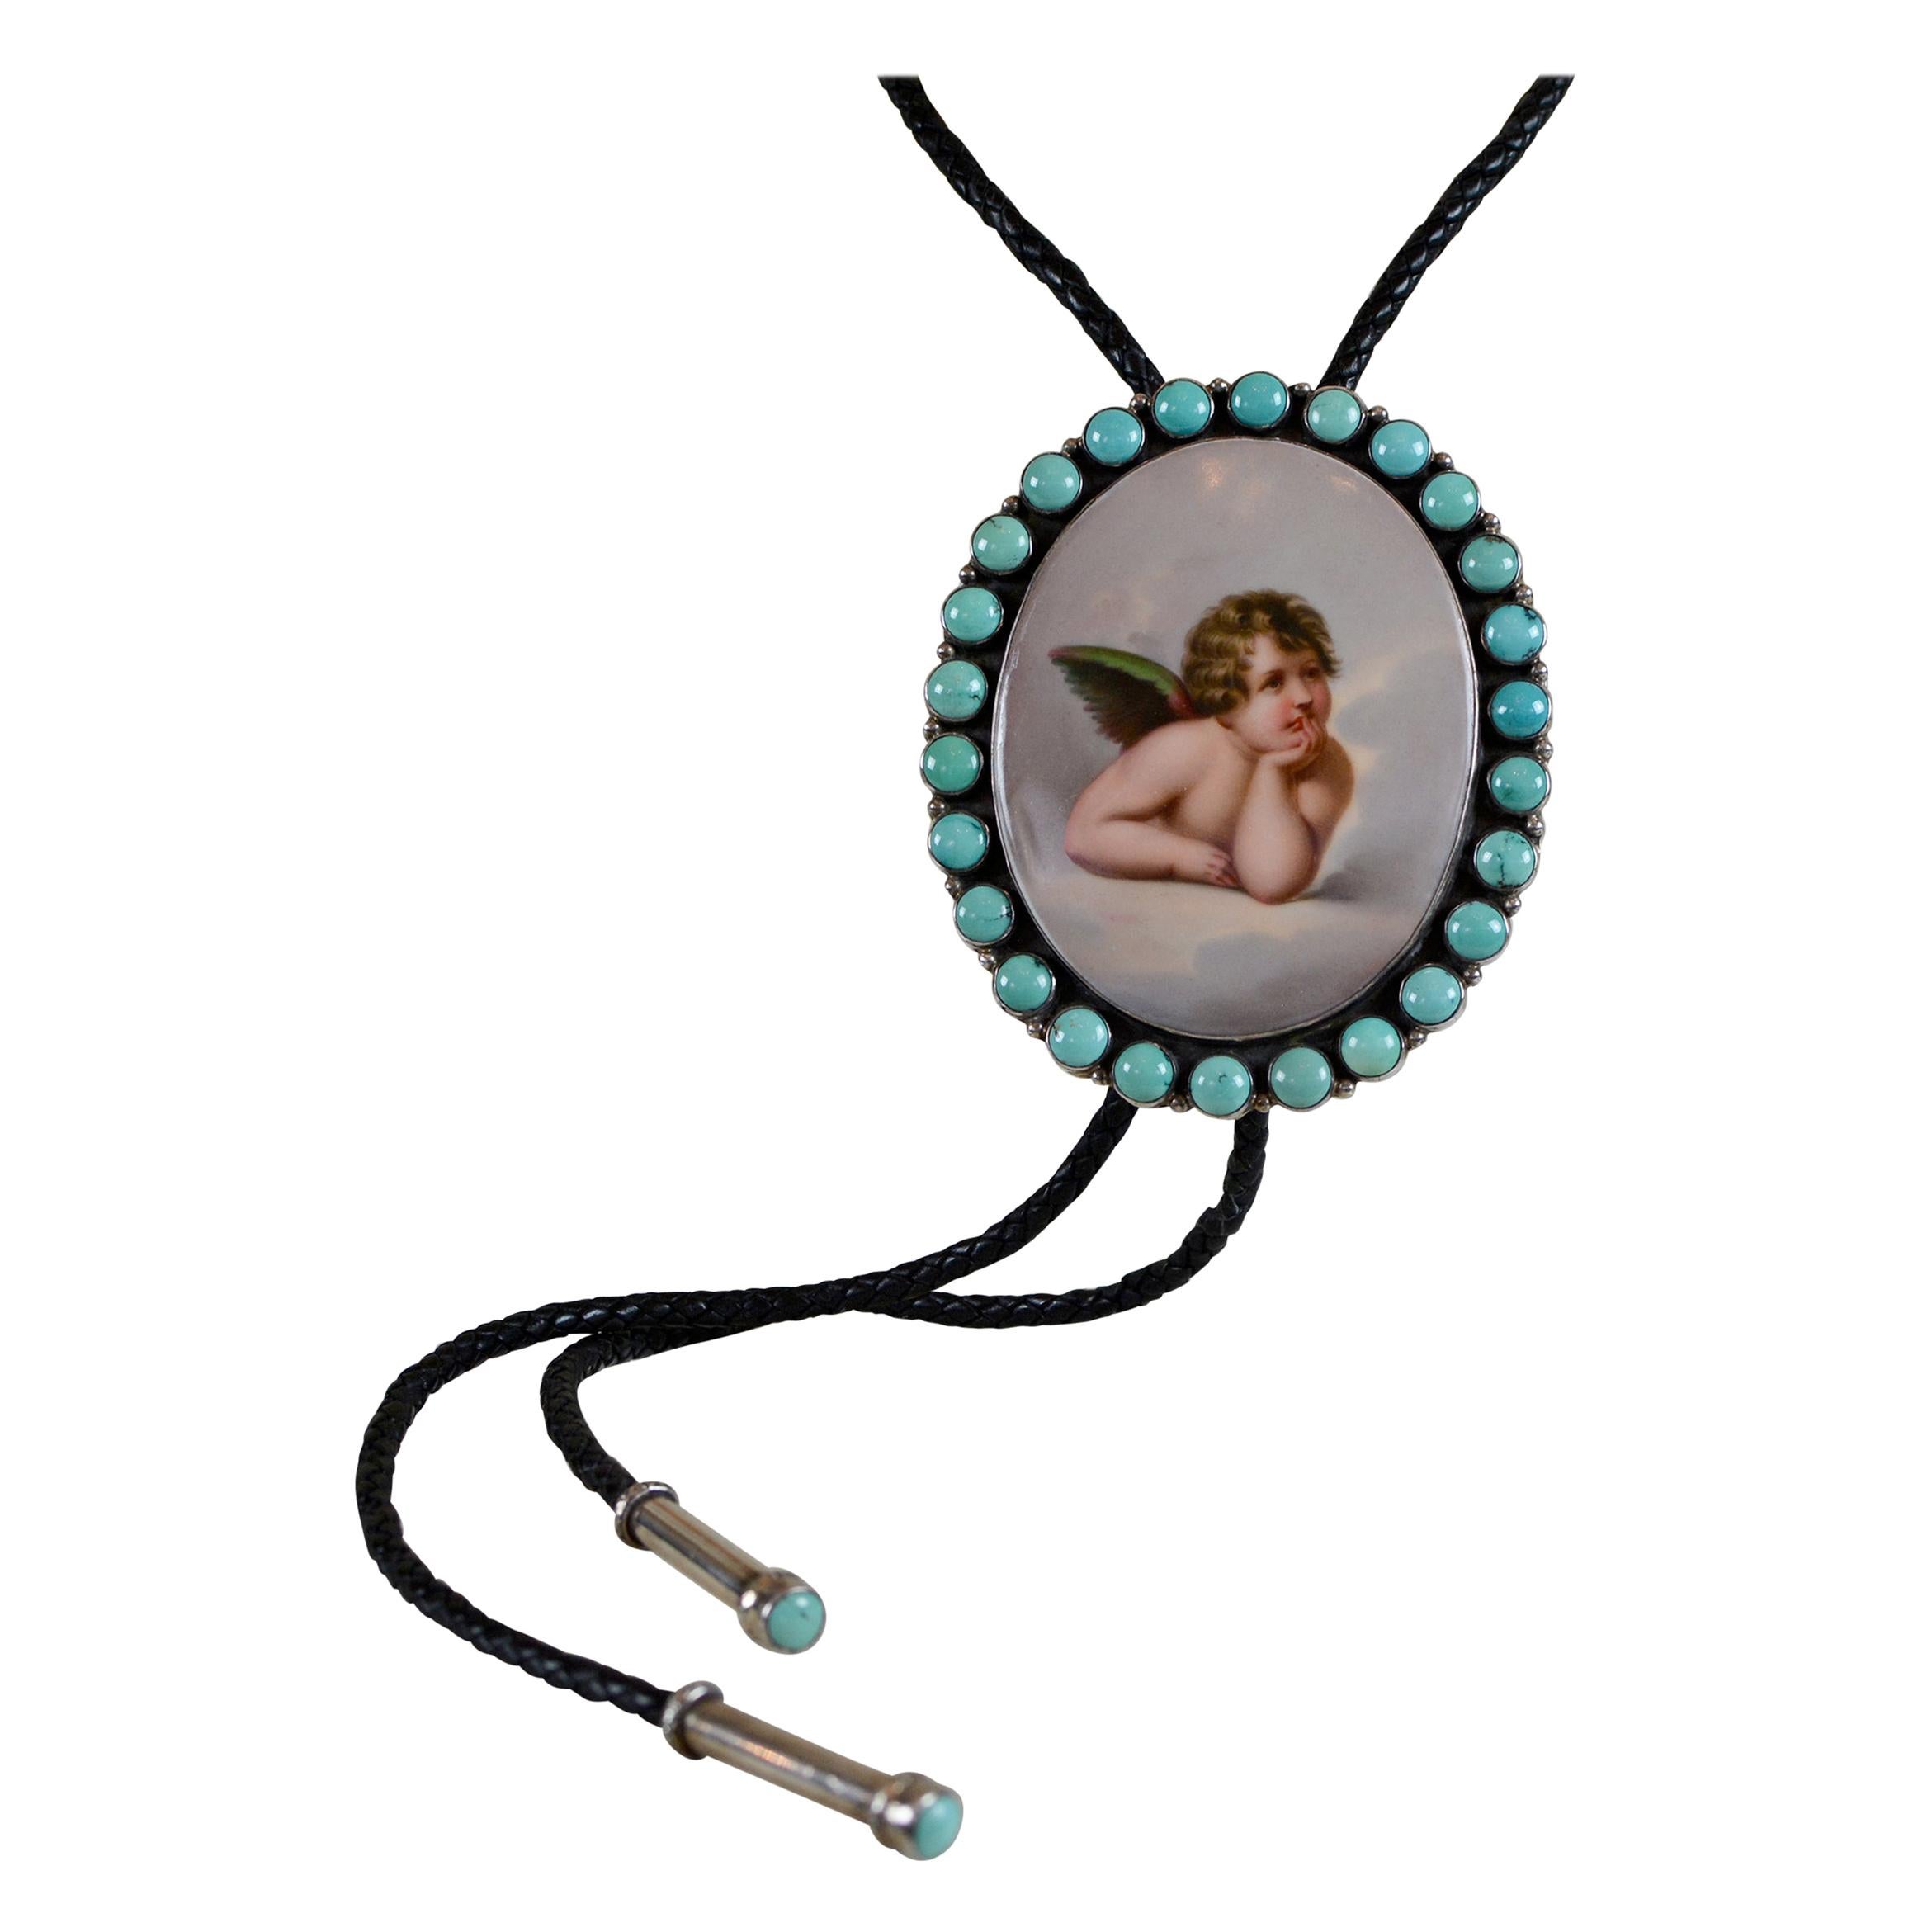 Jill Garber 19th Century Sistine Madonna Angel Portrait with Turquoise Bolo Tie 